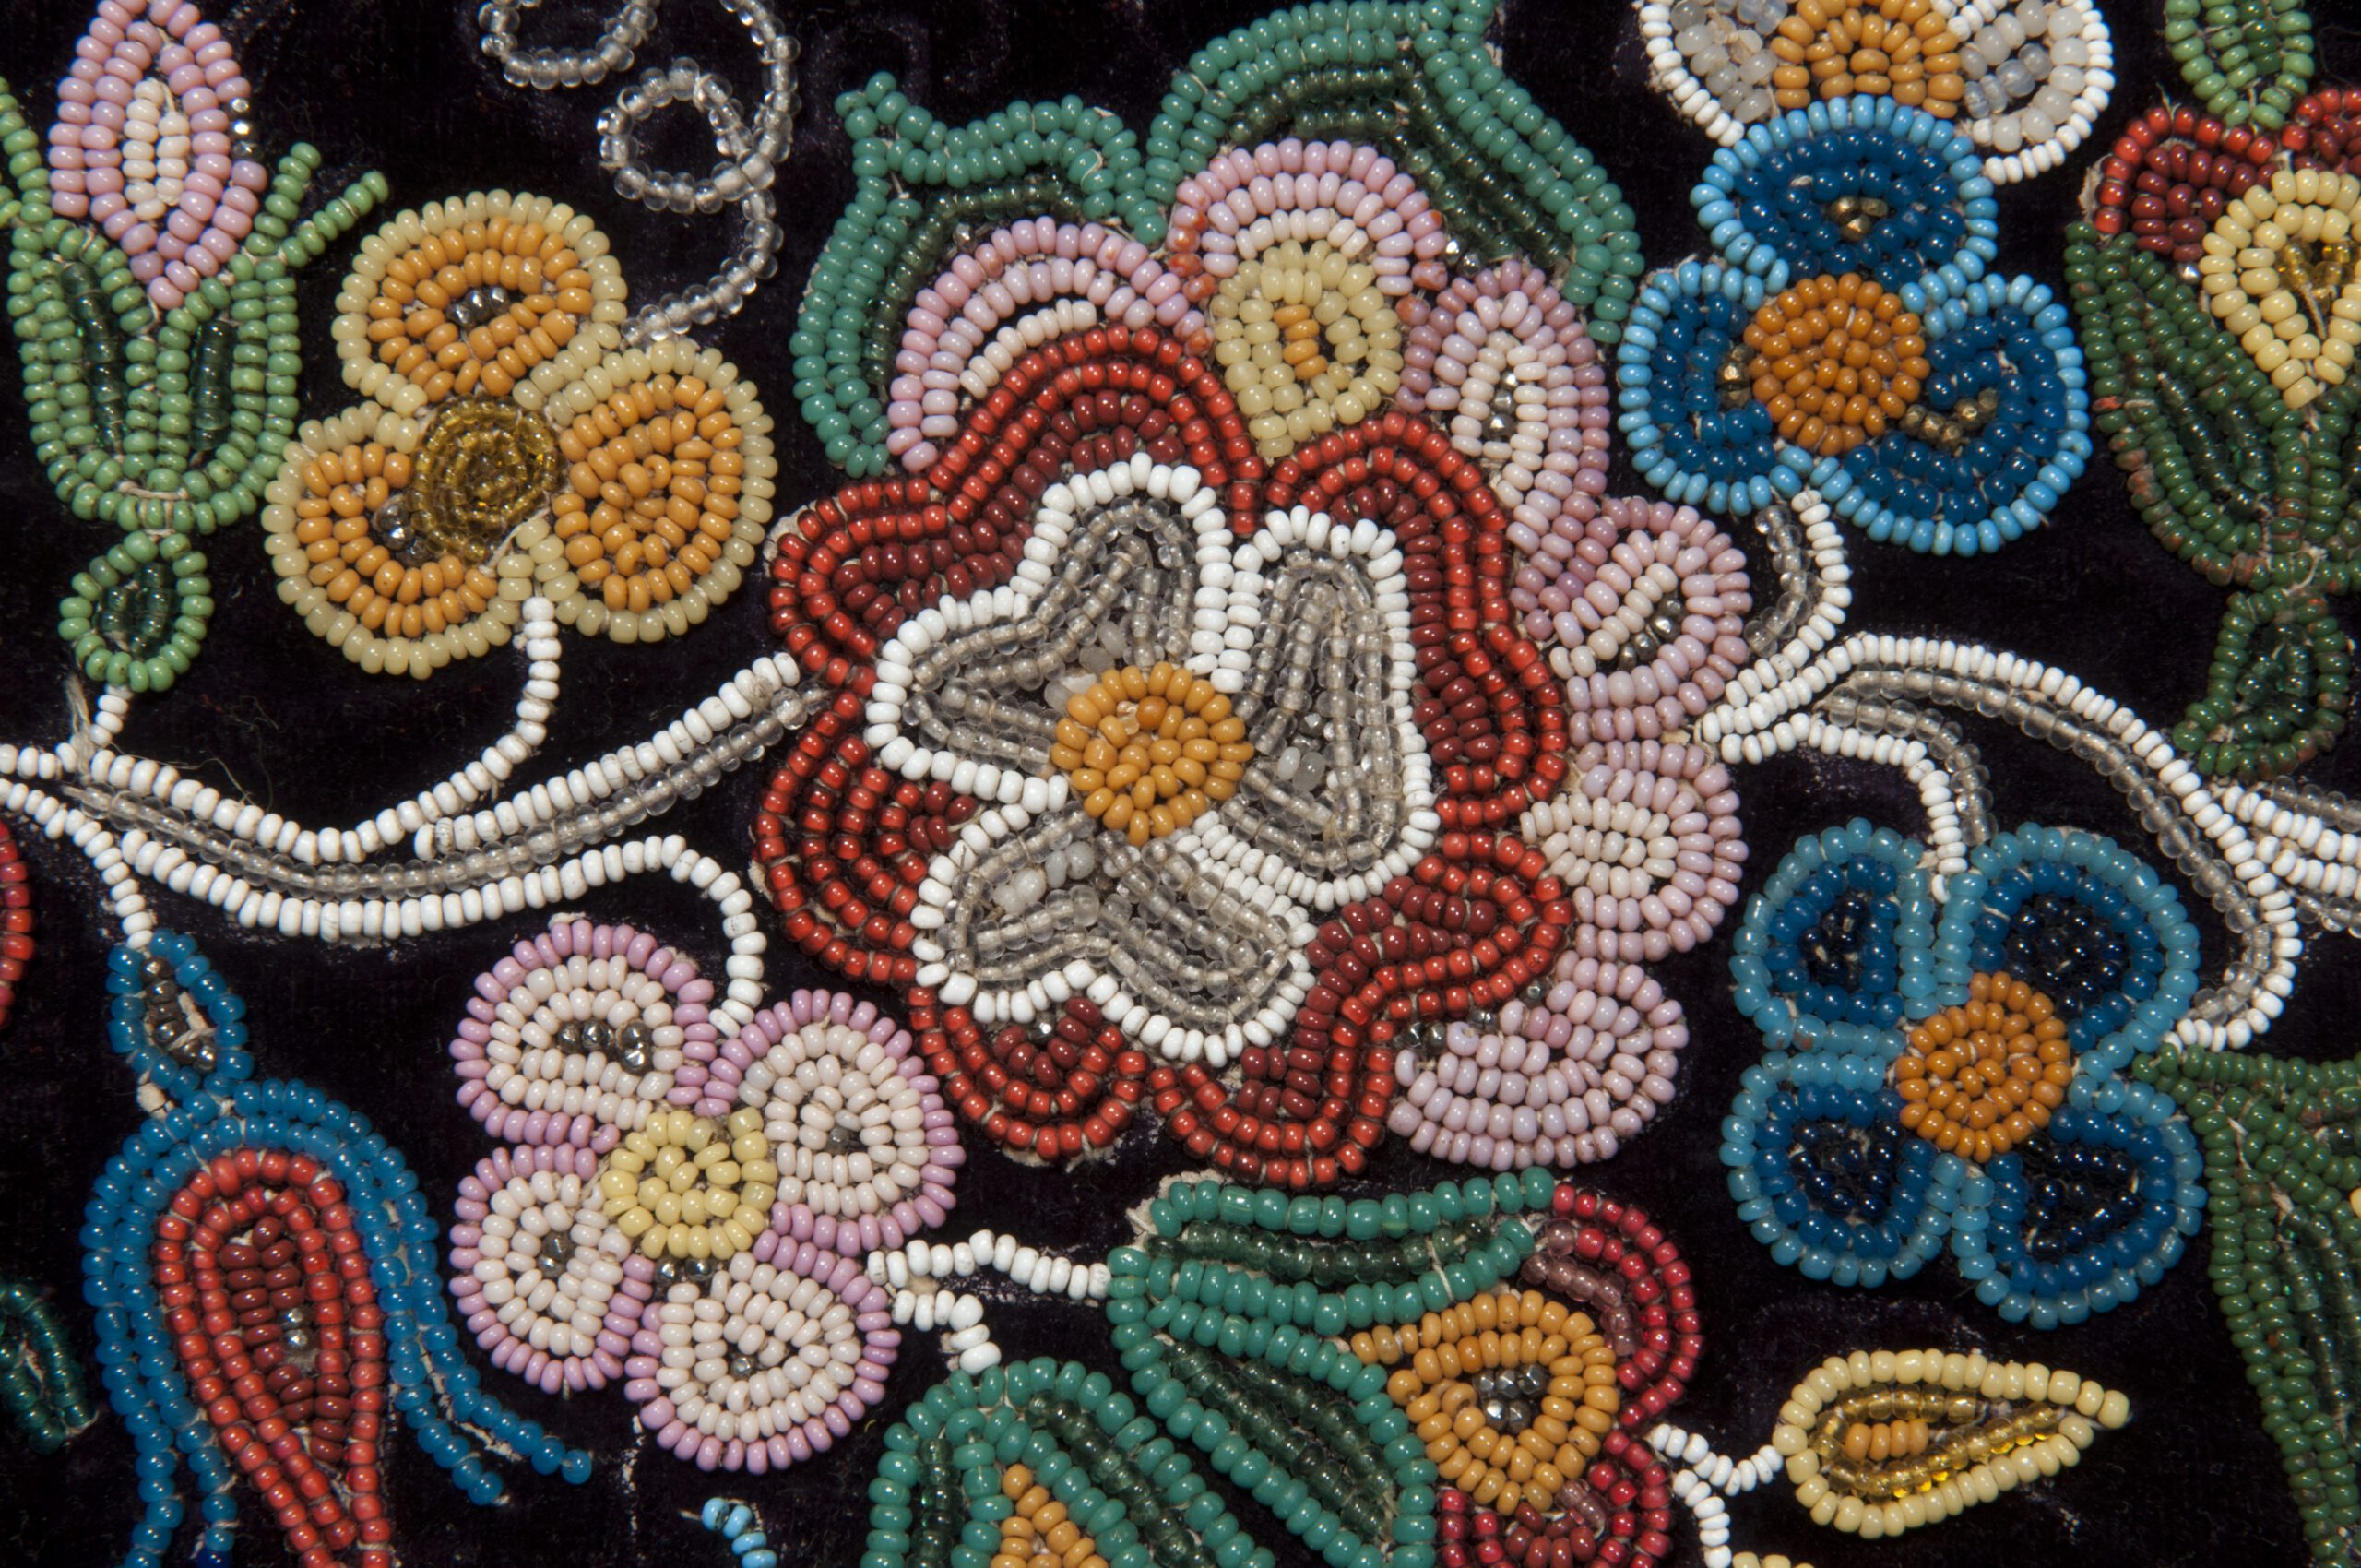 Close-up on a piece of colourful, intricate beadwork on a black background.